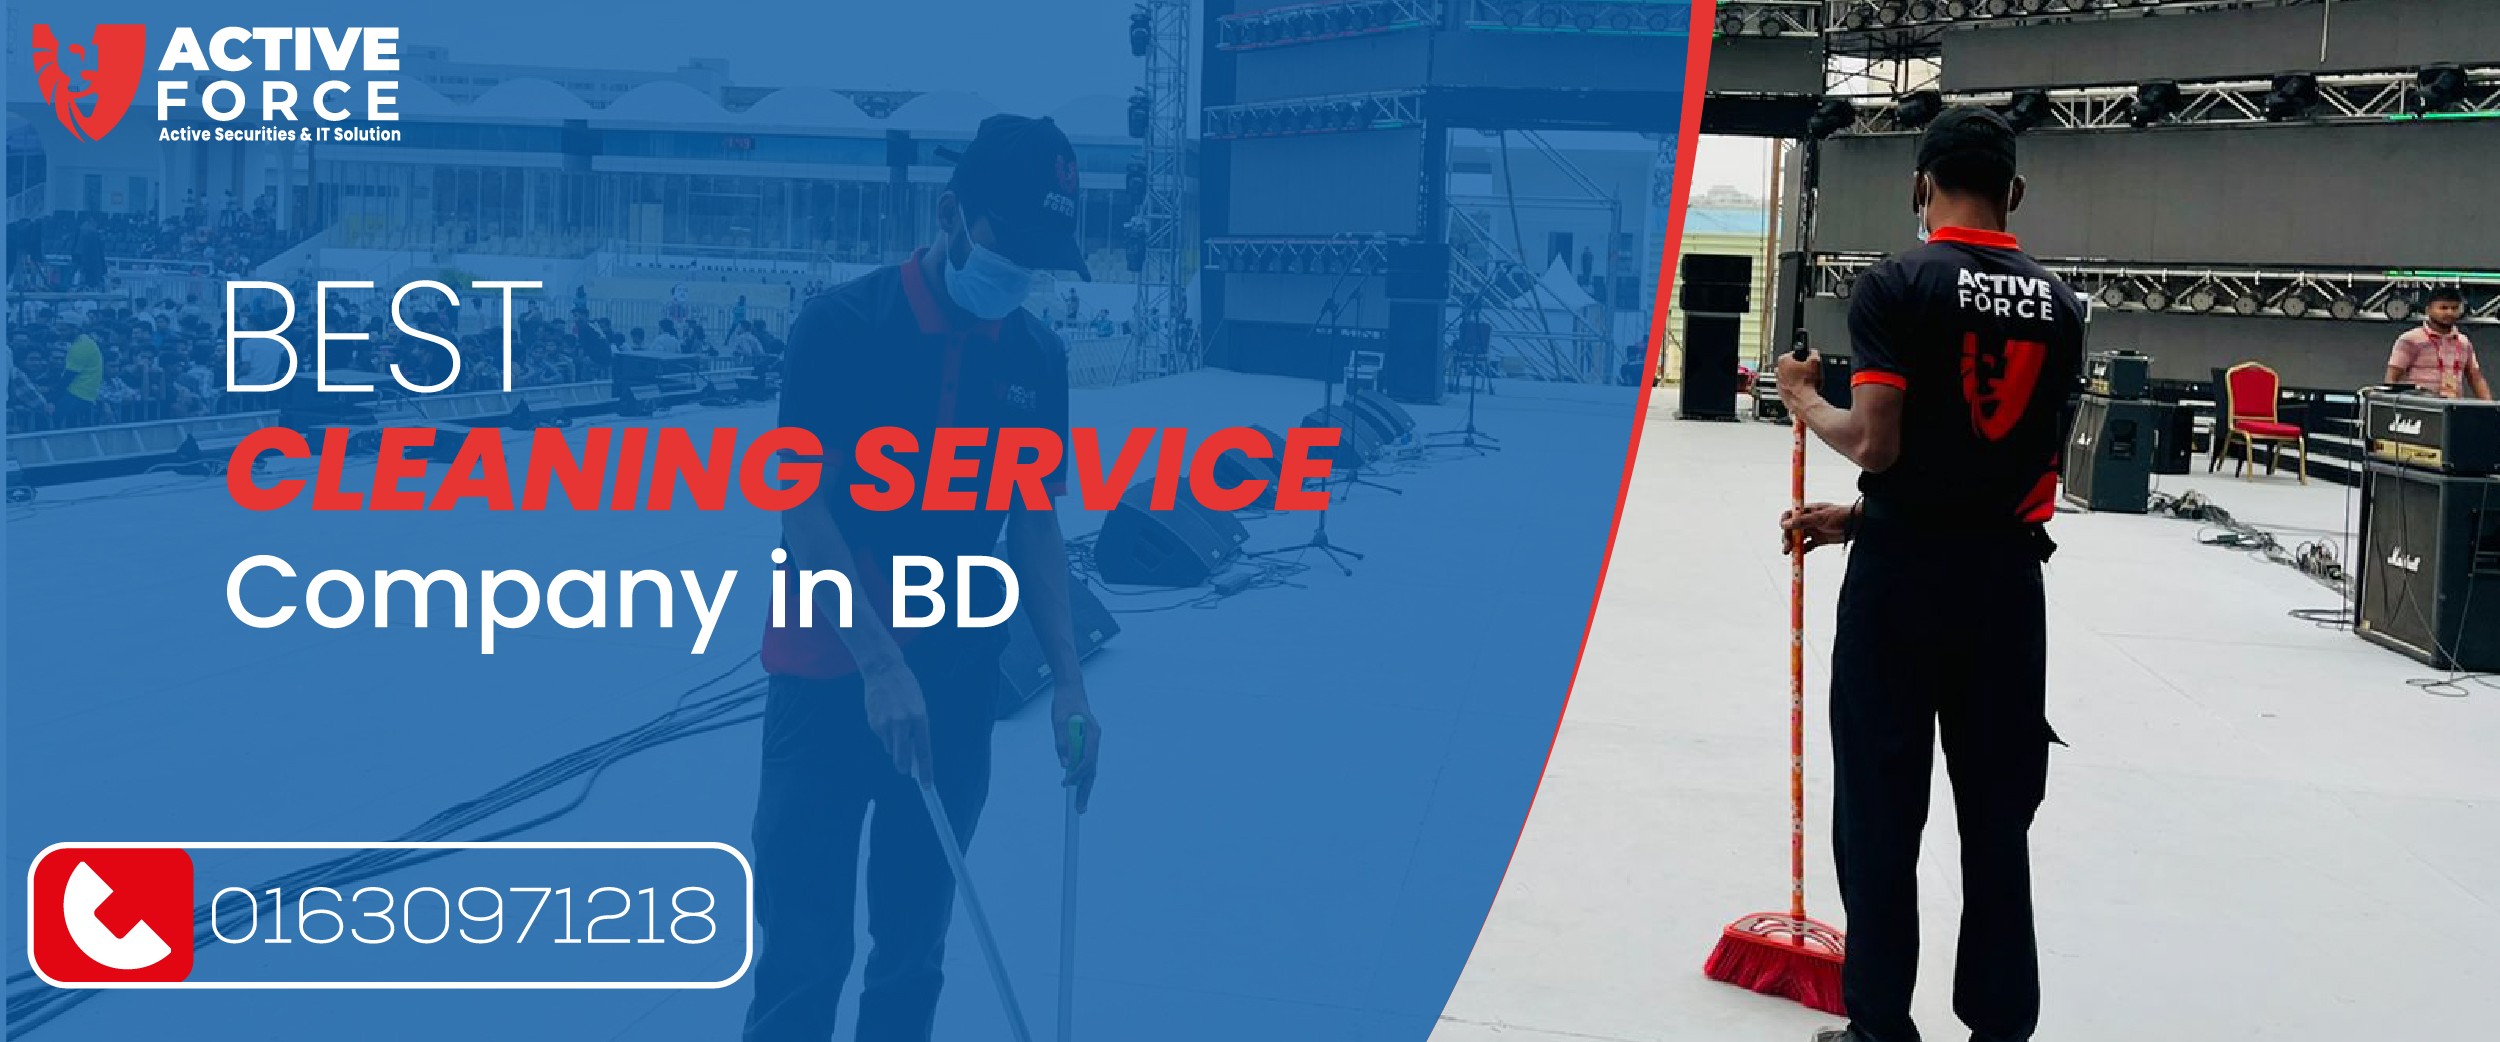 Best Cleaning Services Company in BD | Active Force